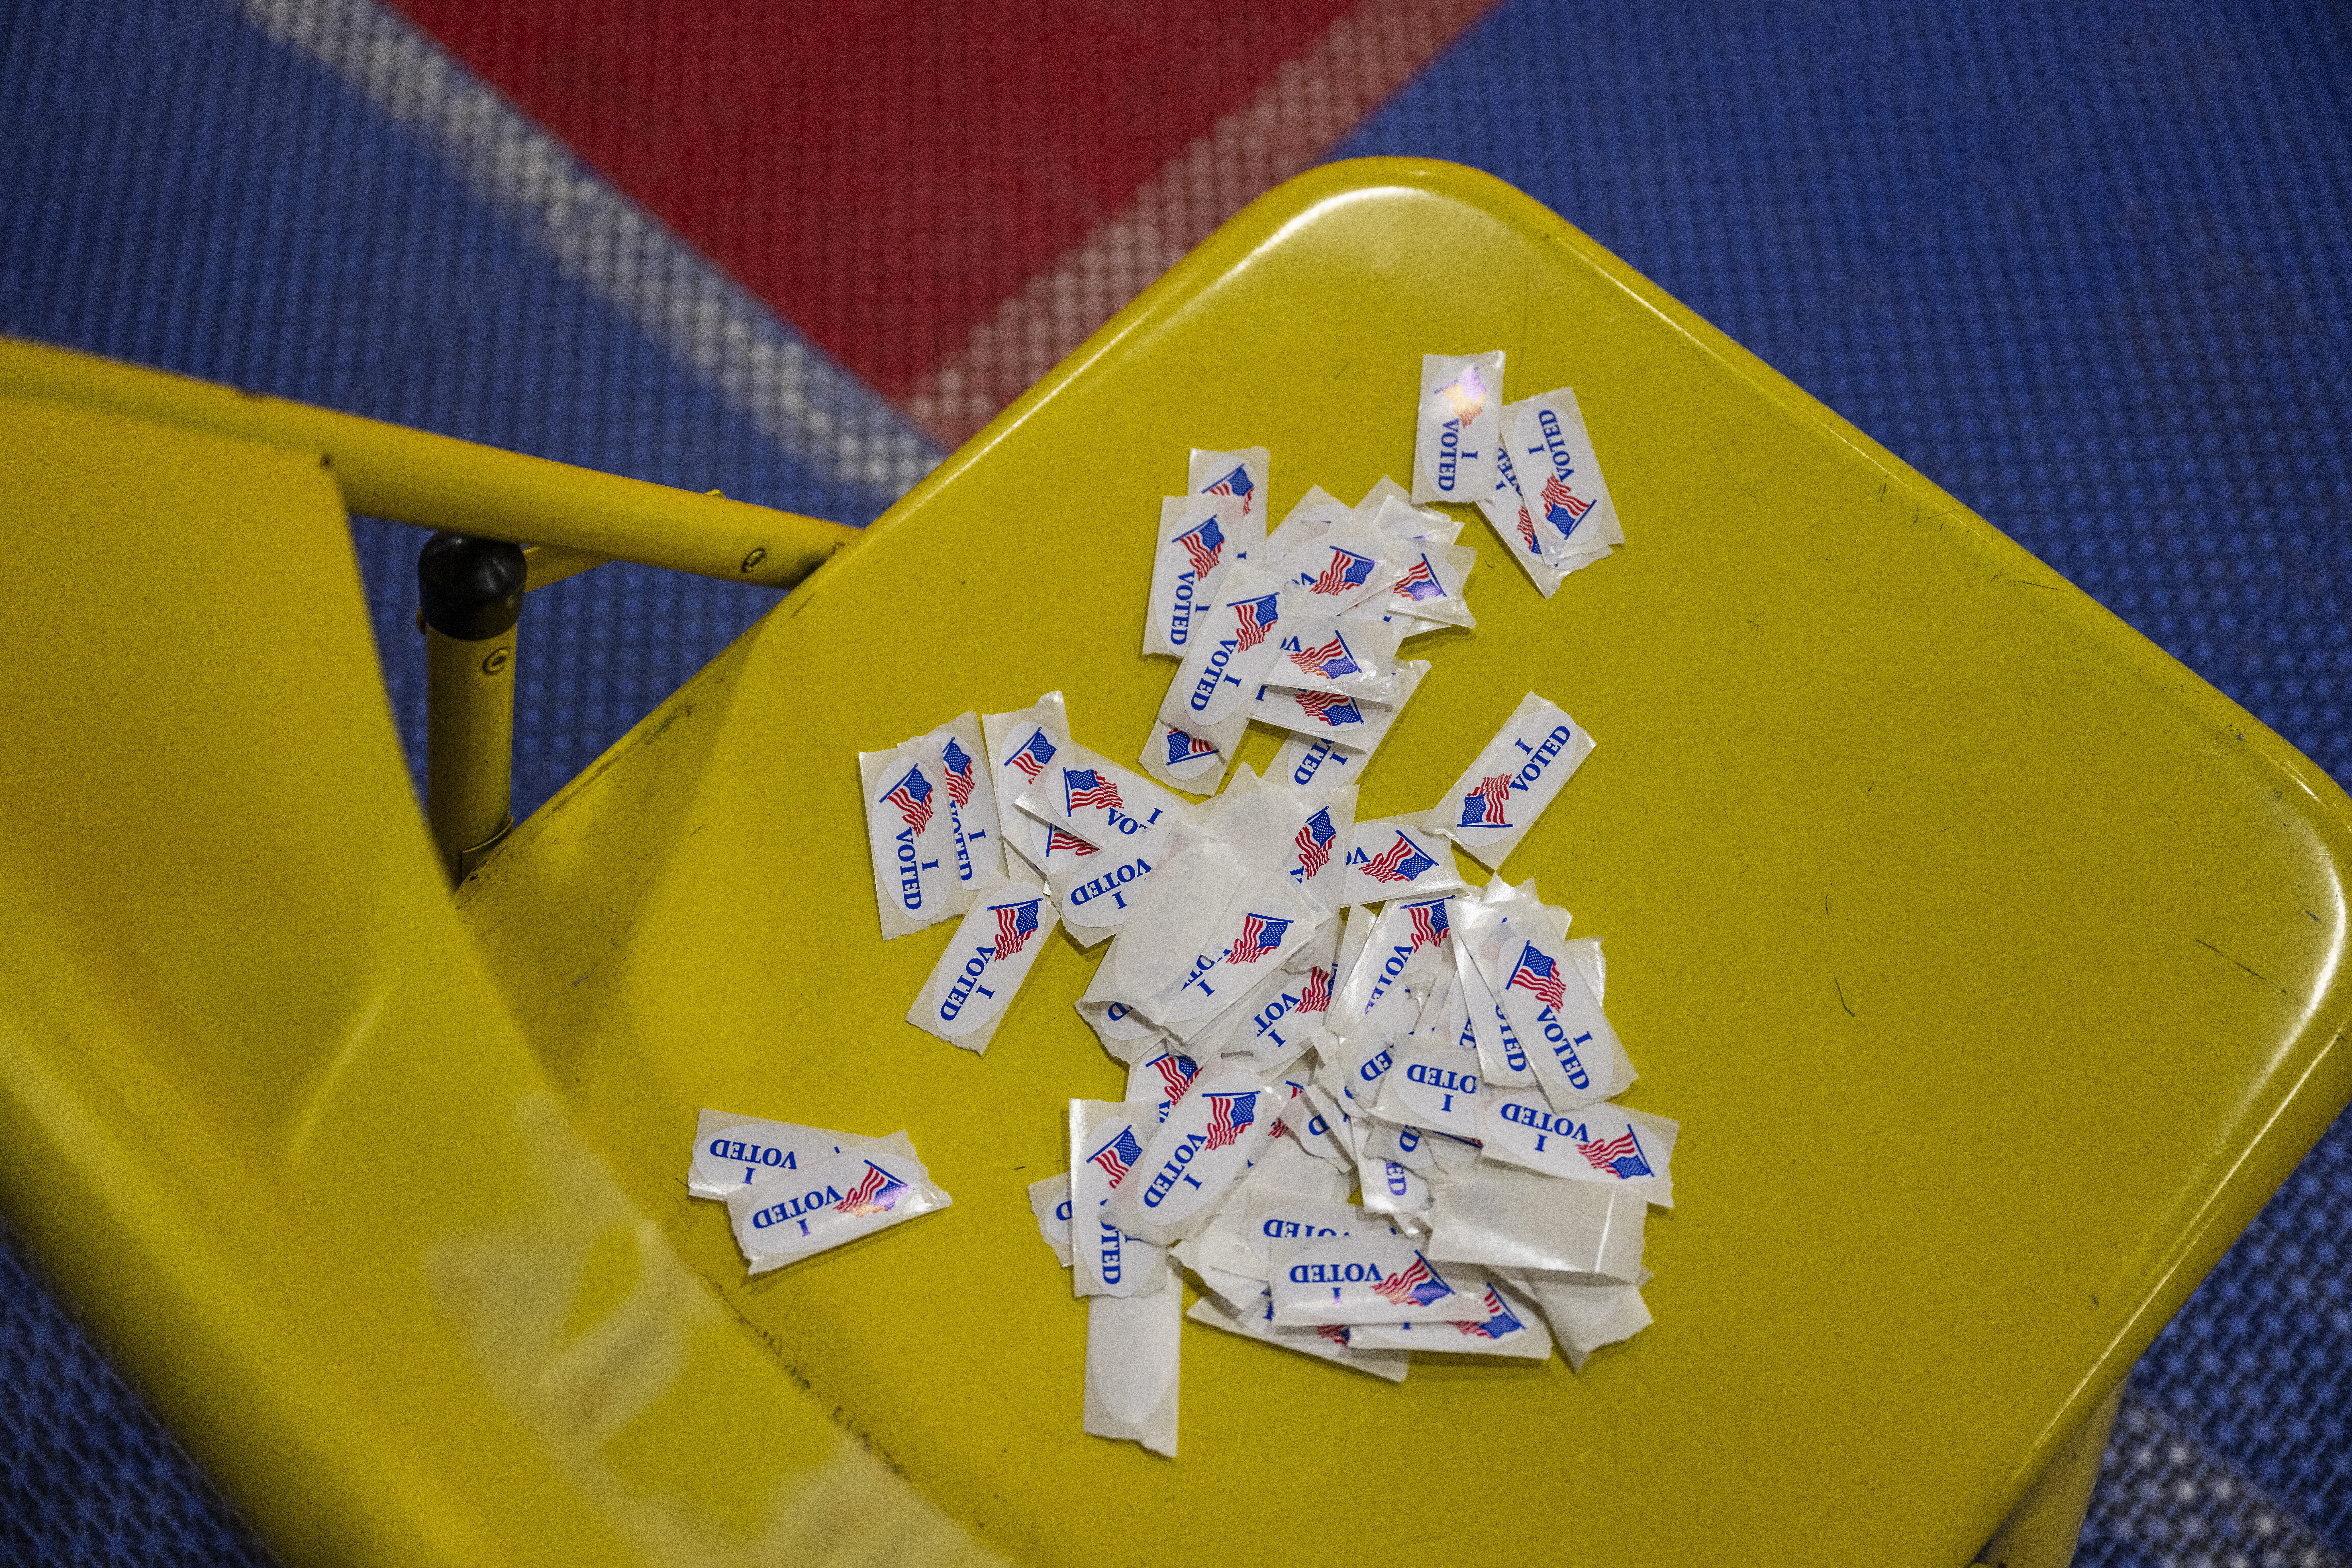 voting stickers on chair